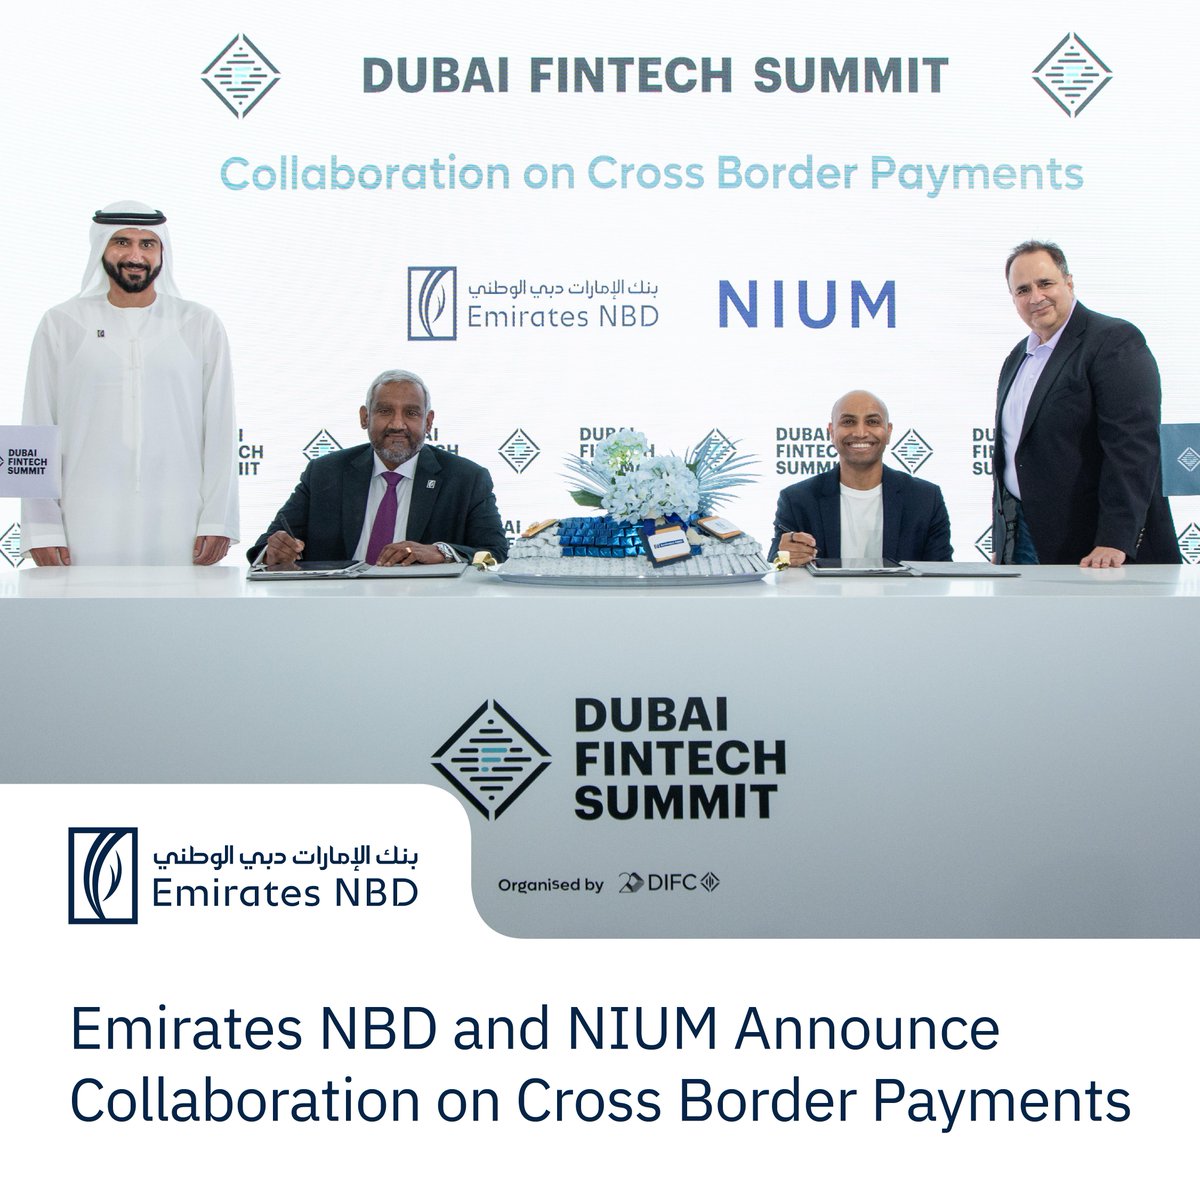 Breaking new ground in financial services together during the Dubai FinTech Summit 2024. We are pleased to announce our partnership with NIUM to revolutionize cross-border payments in the Middle East. This strategic (cont) ms.spr.ly/l/6012Ypi8y